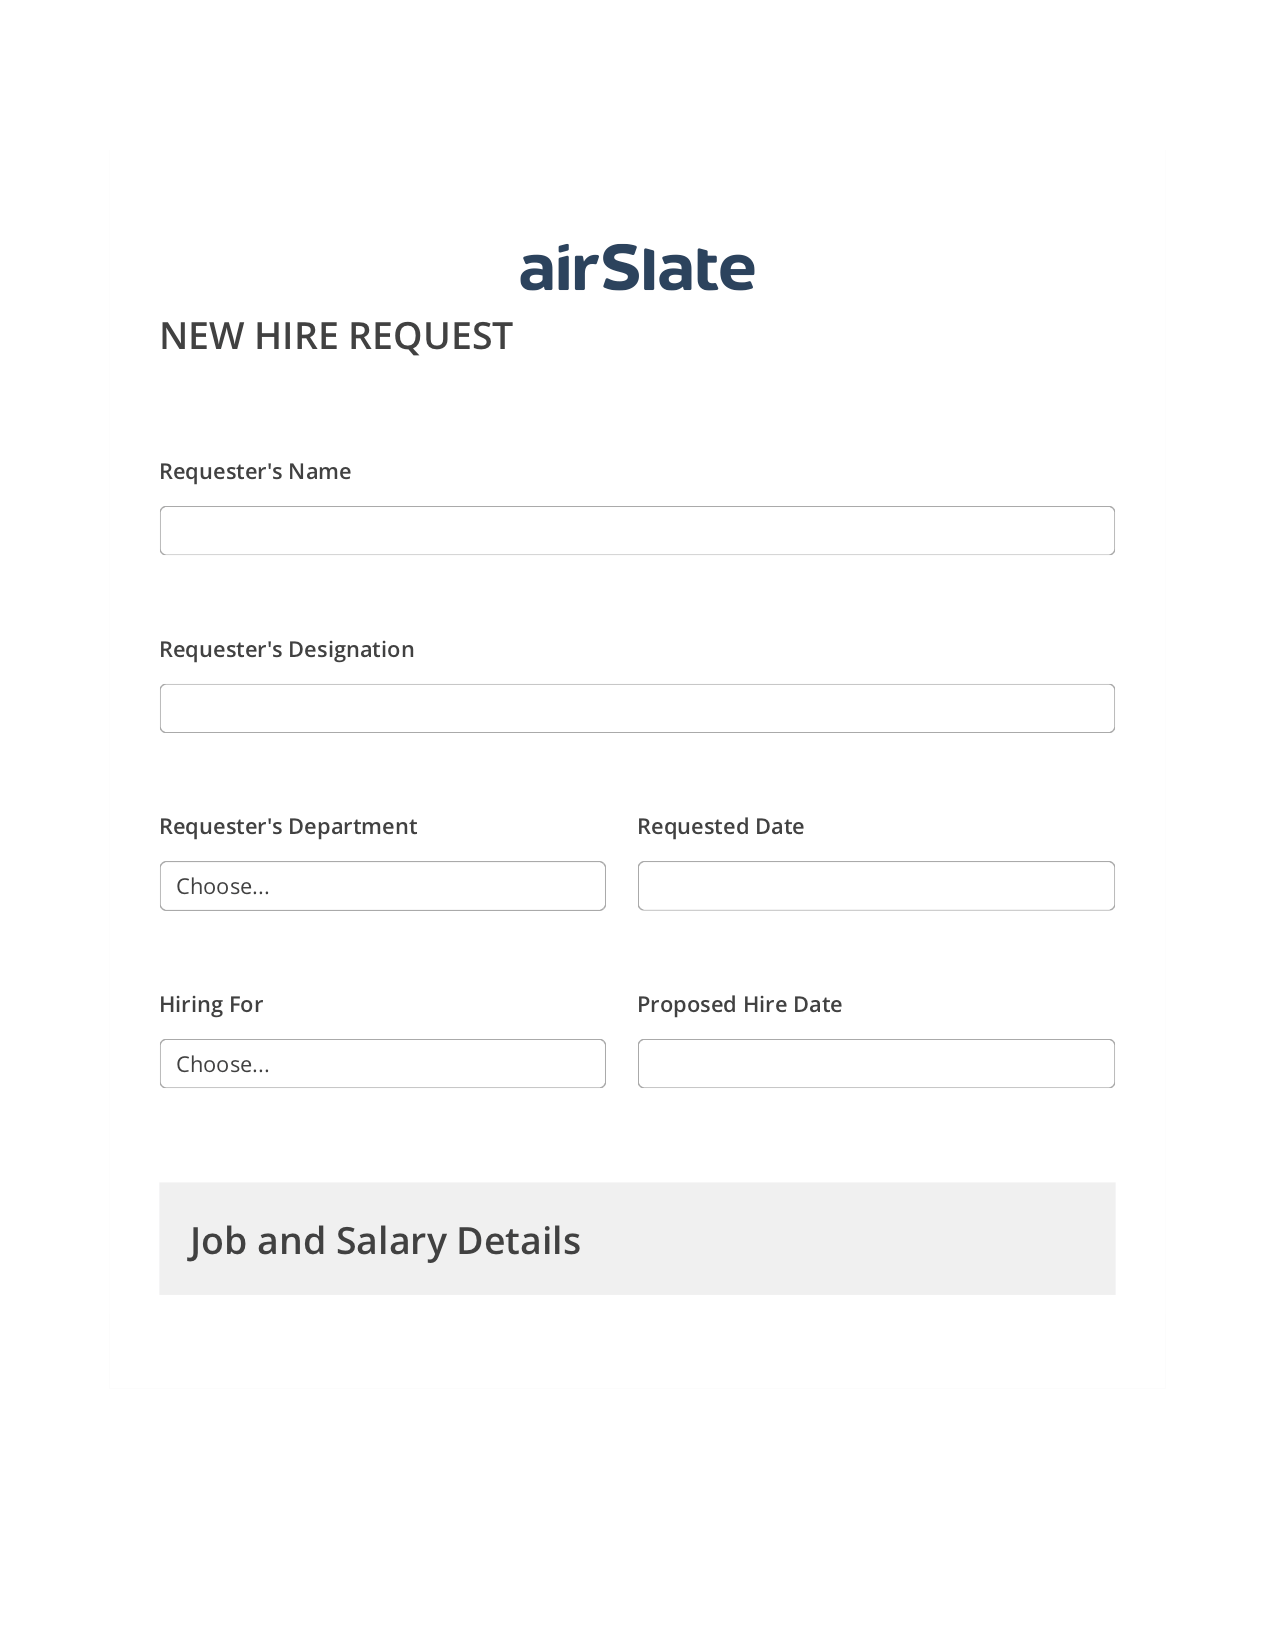 Multirole Hiring Request Workflow Pre-fill from Litmos bot, Remove Slate Bot, Archive to OneDrive Bot